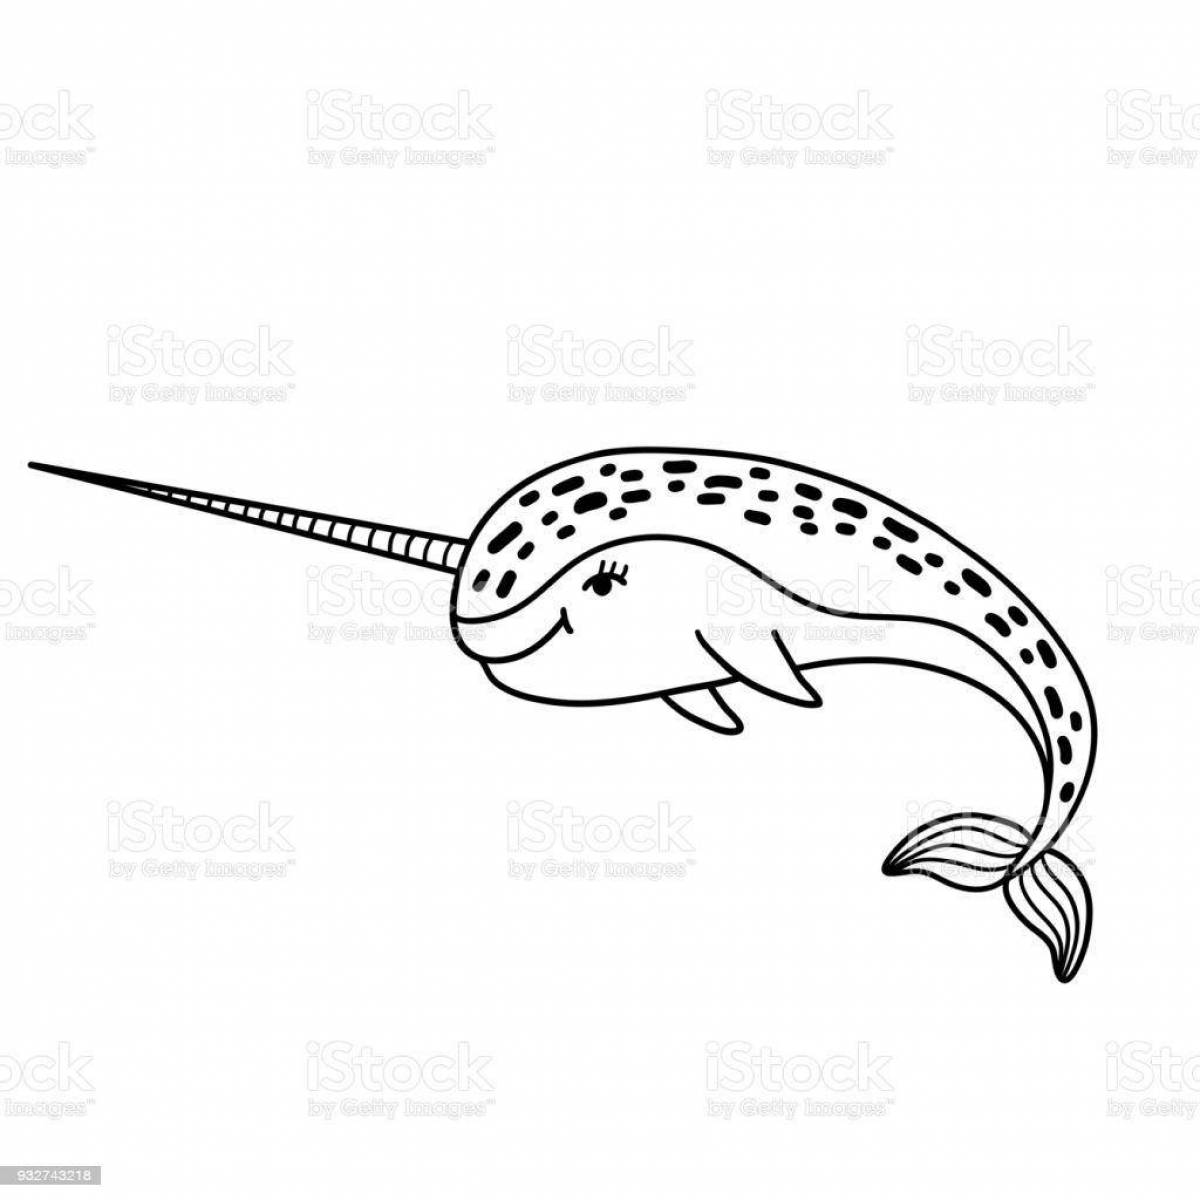 Coloring book shining narwhal for children